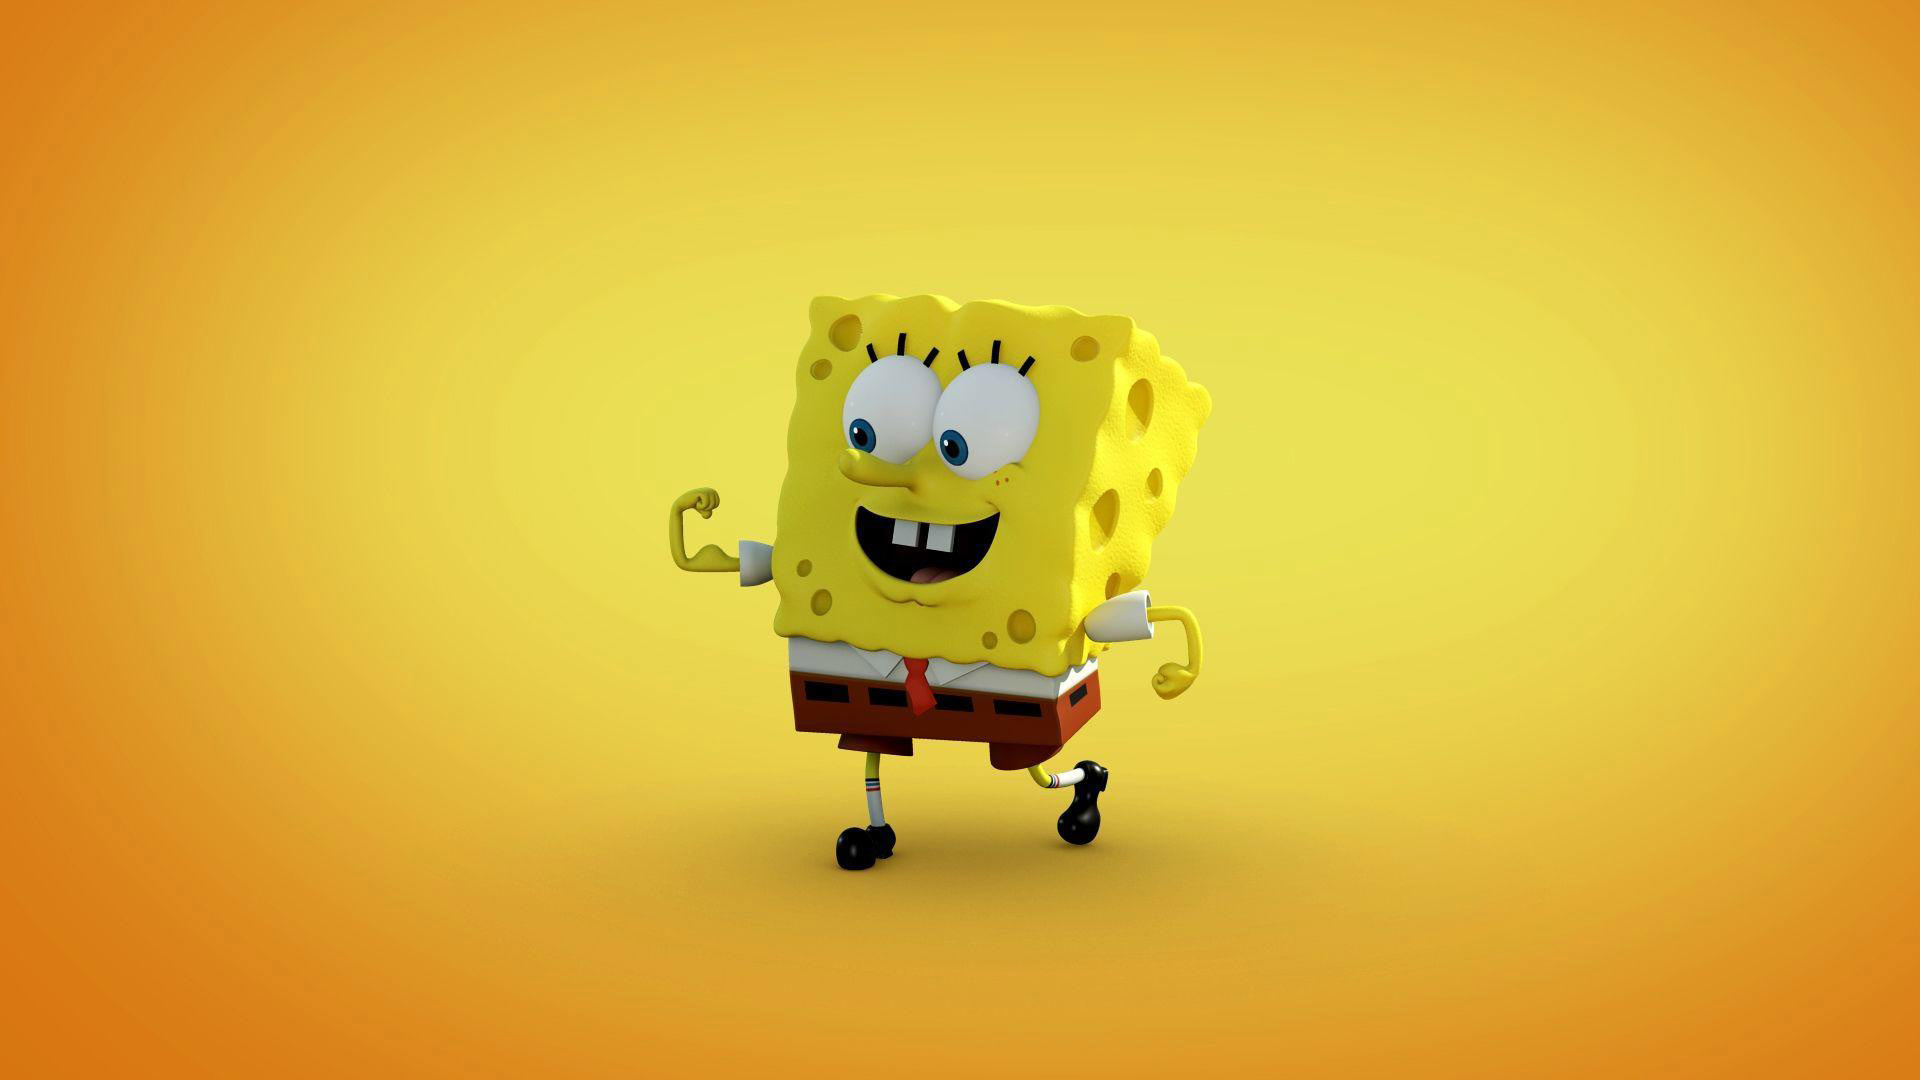 Spongebob With Red Tie Wallpaper, HD Cartoon 4K Wallpapers, Images, Photos  and Background - Wallpapers Den